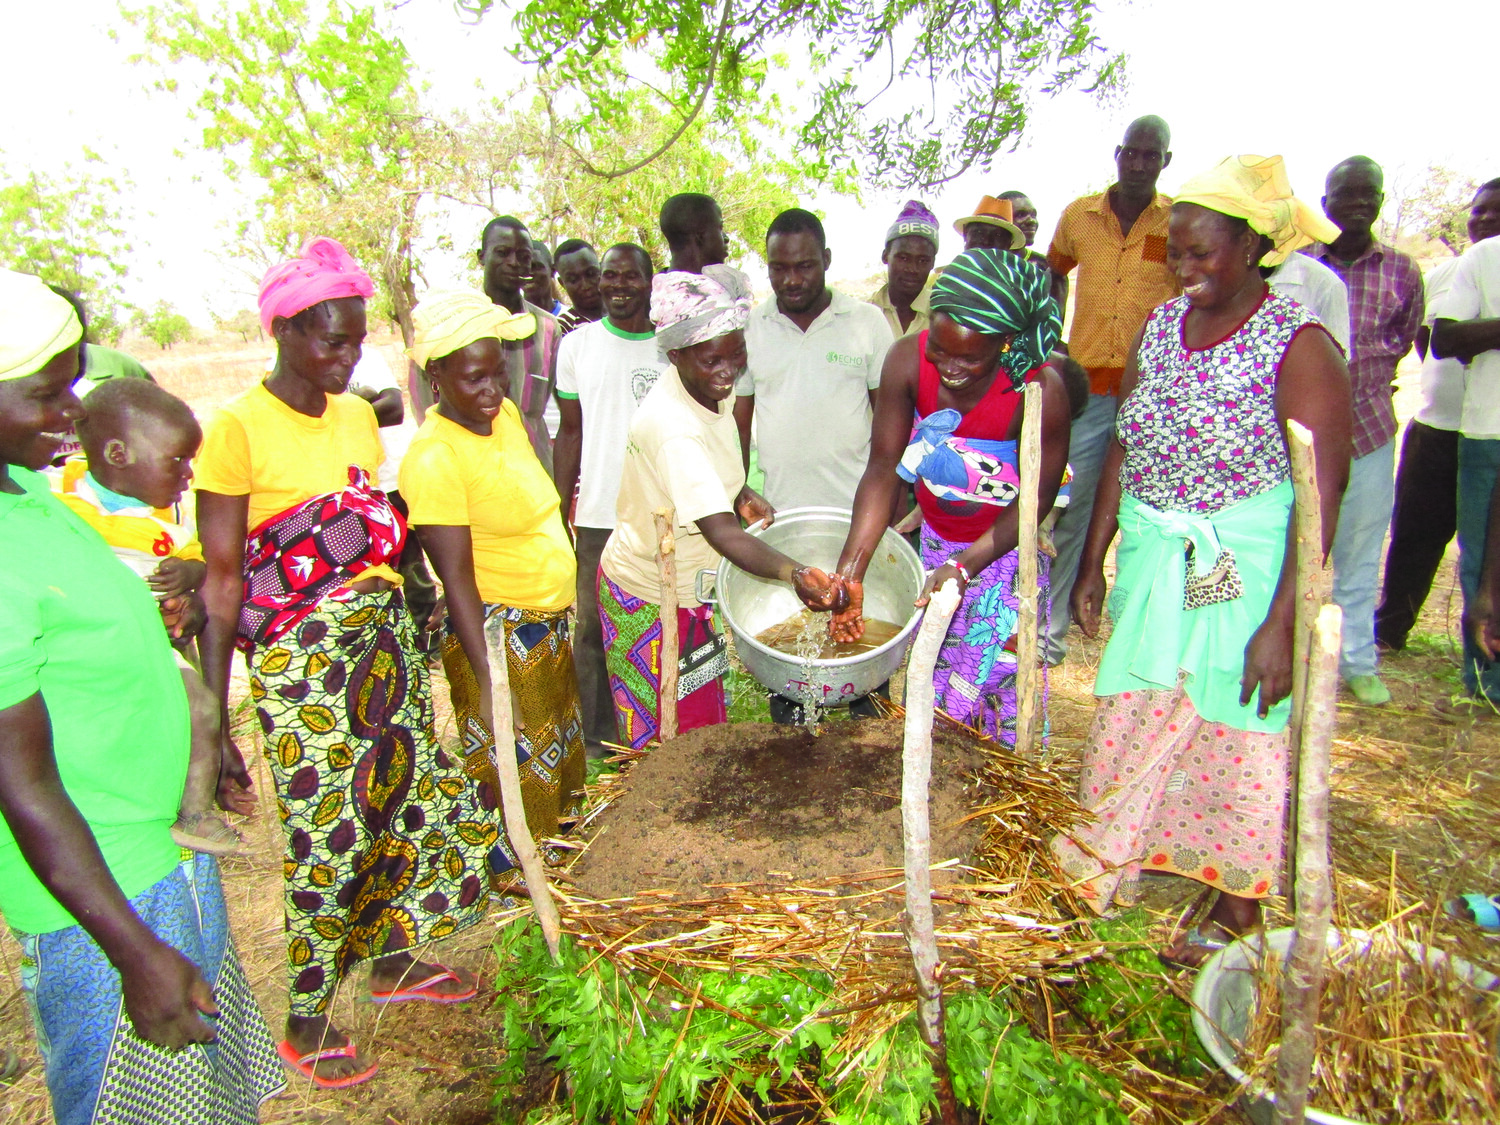 Techniques such as 21-day compost provide trainees with skills to increase their agricultural production with low-cost inputs.